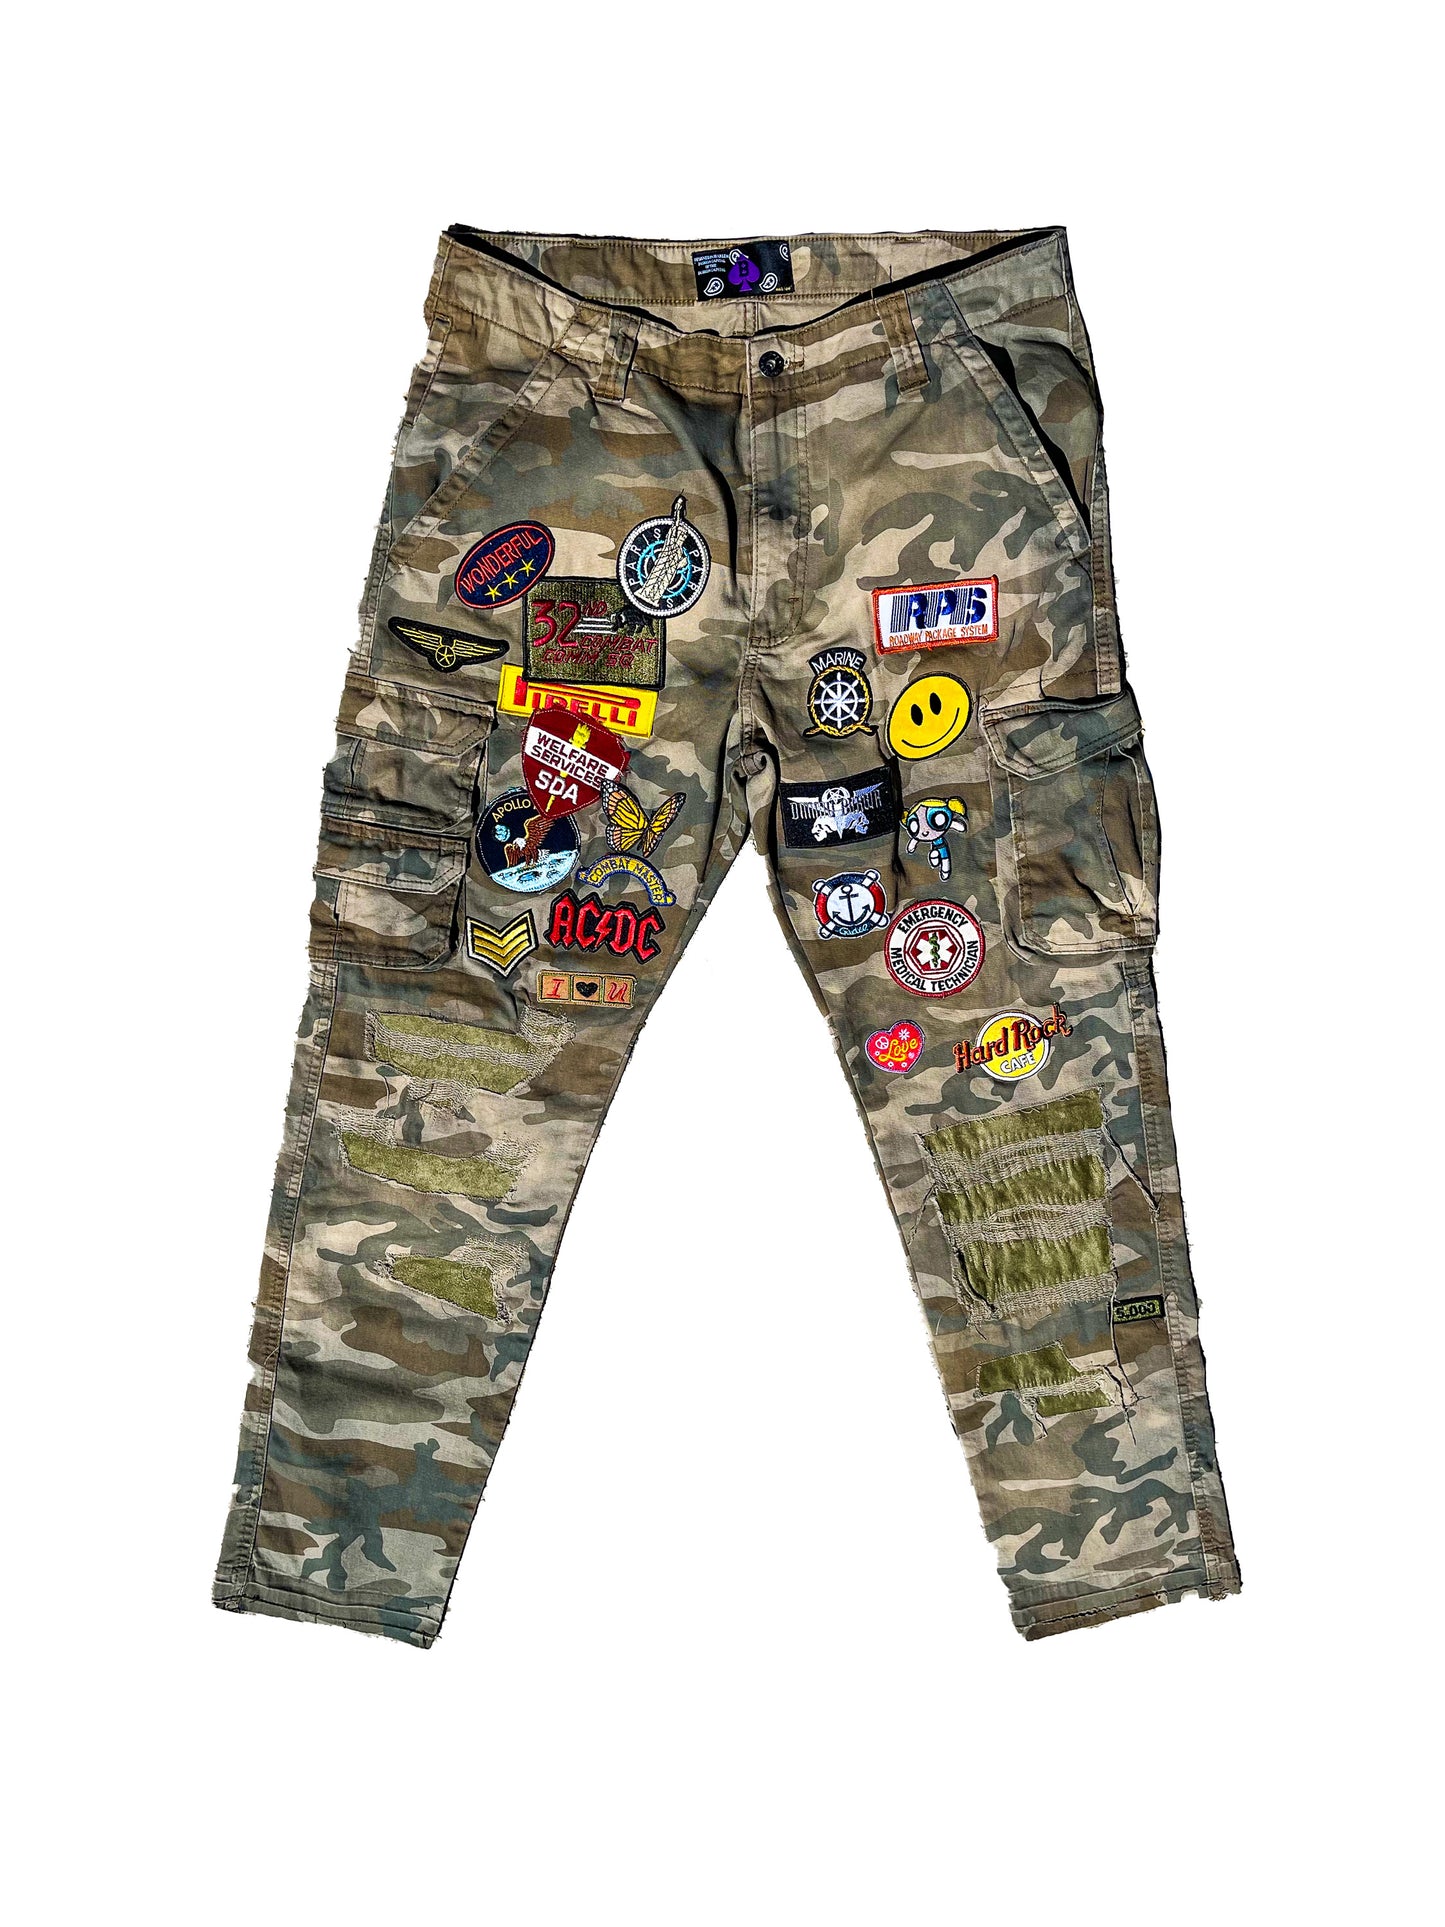 Scouts Honor Cargos